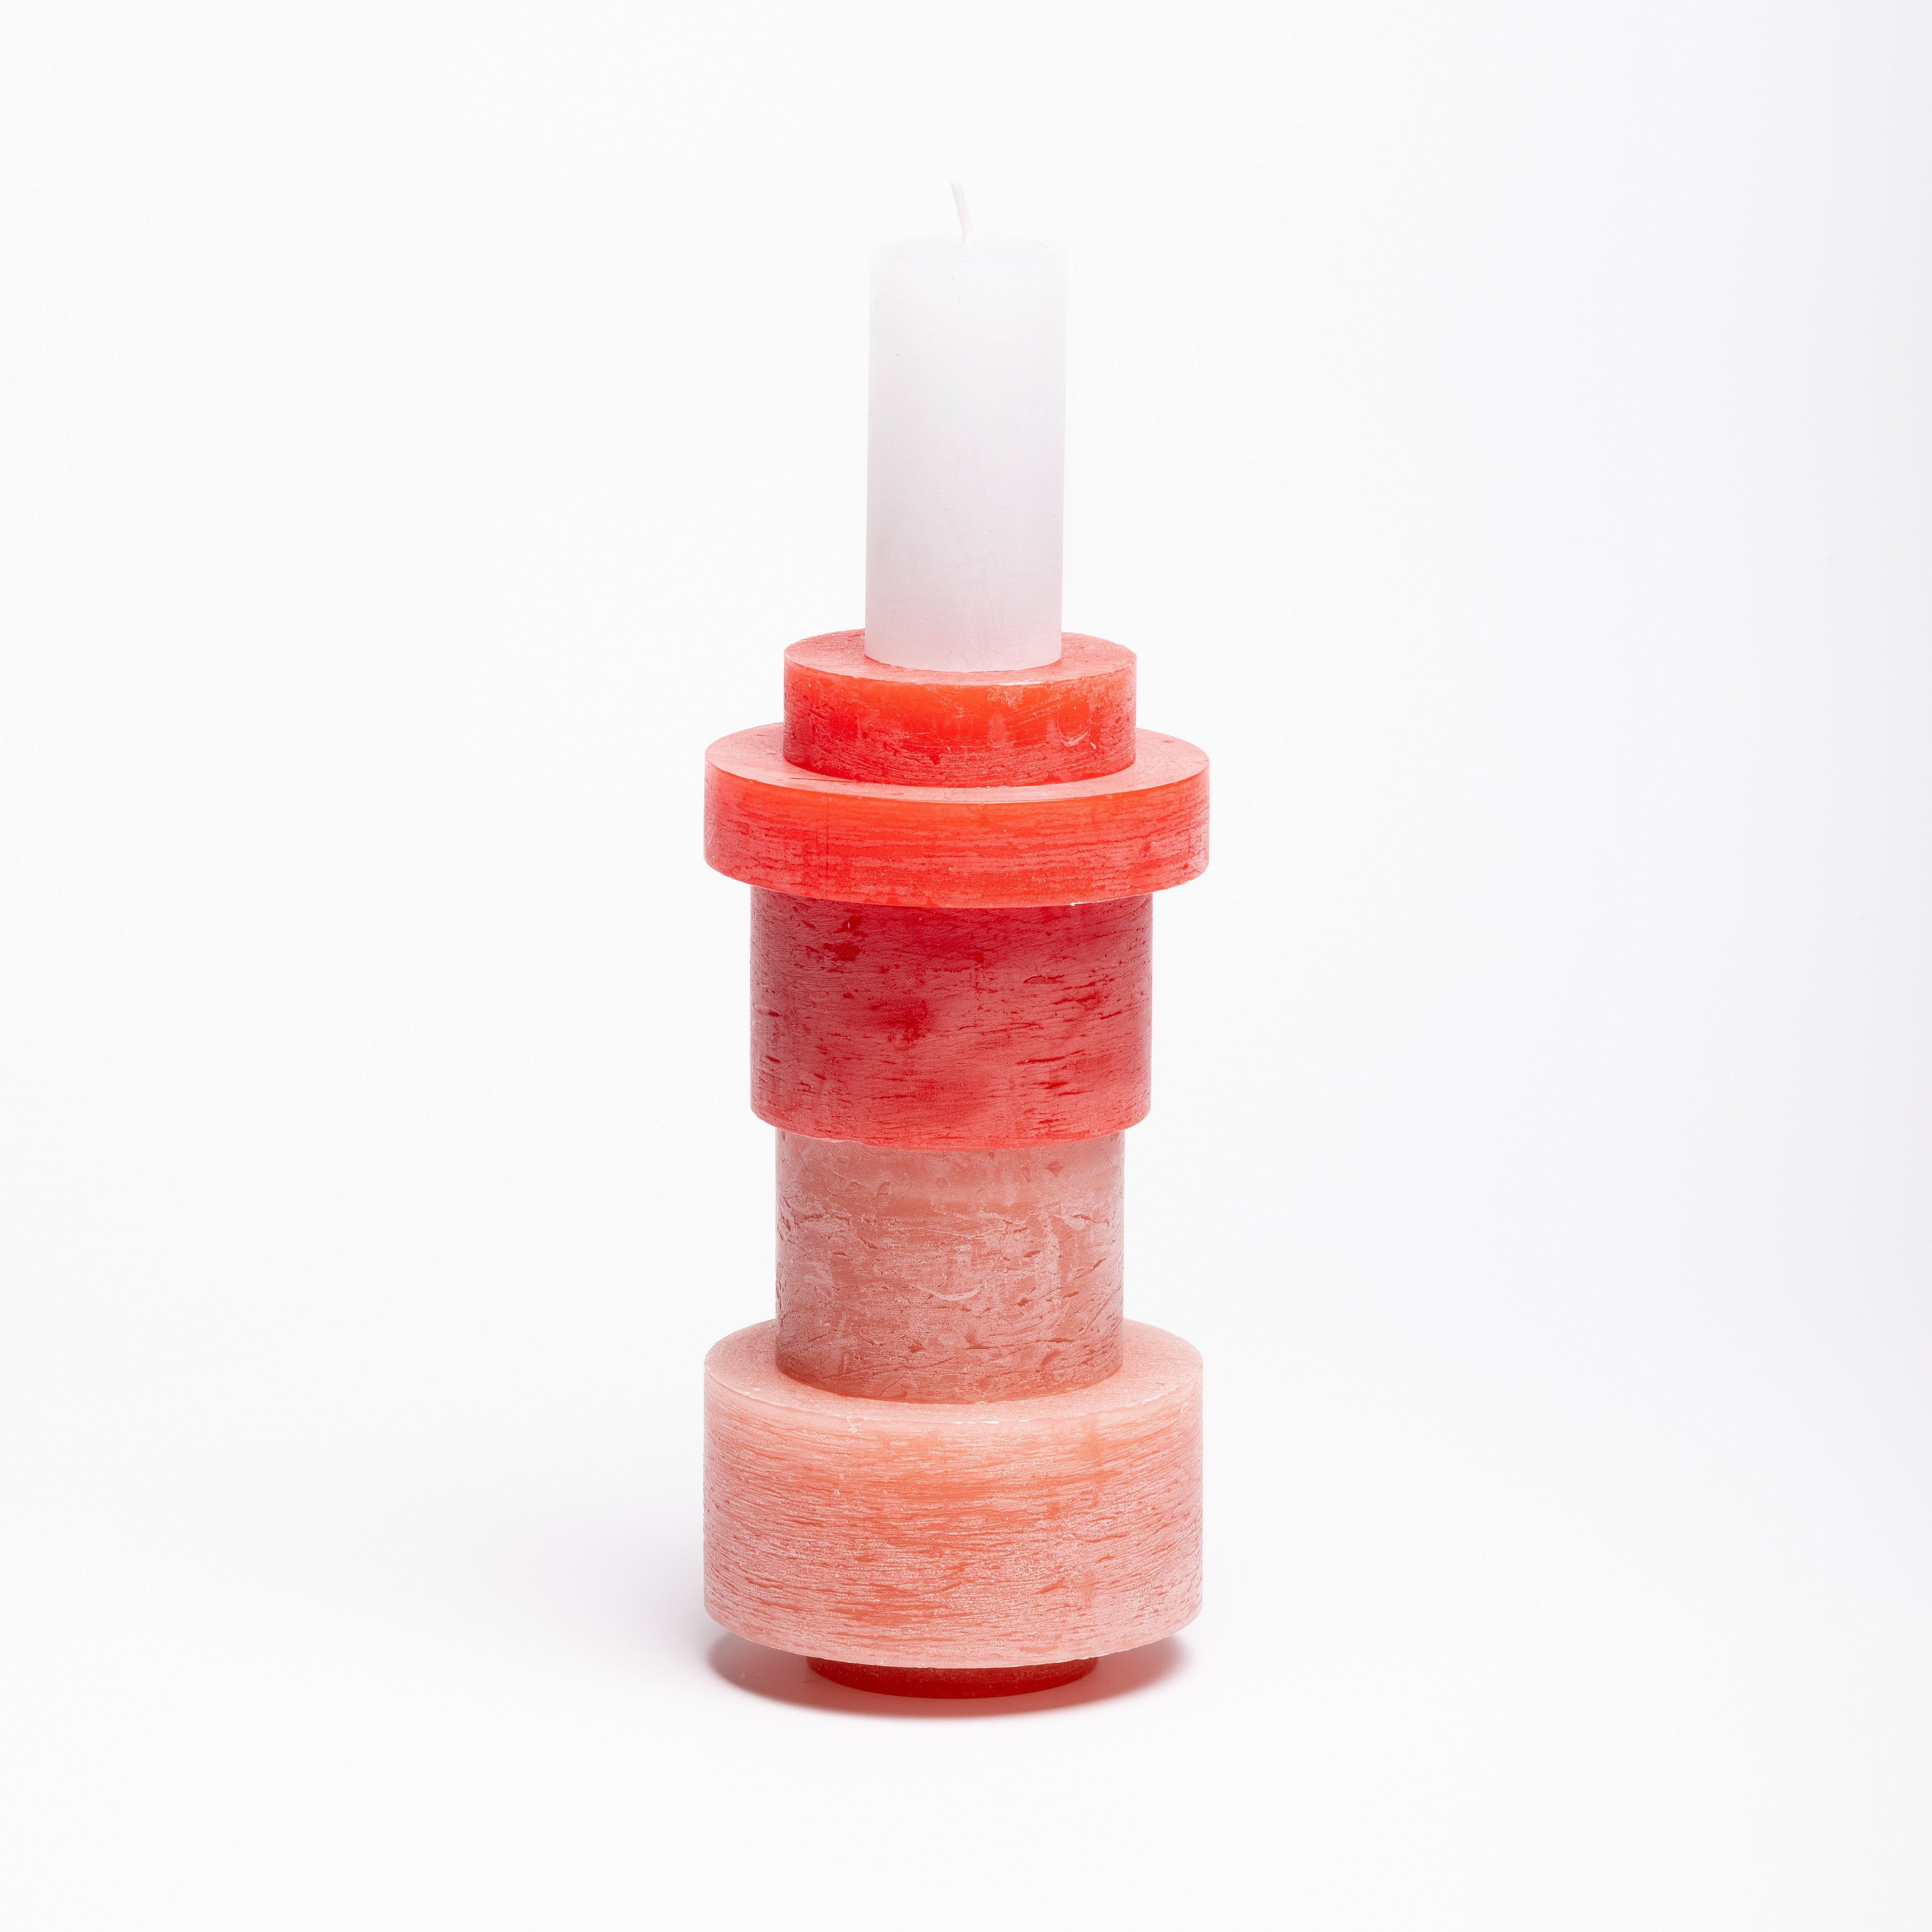 Candl Stack 06 - Red